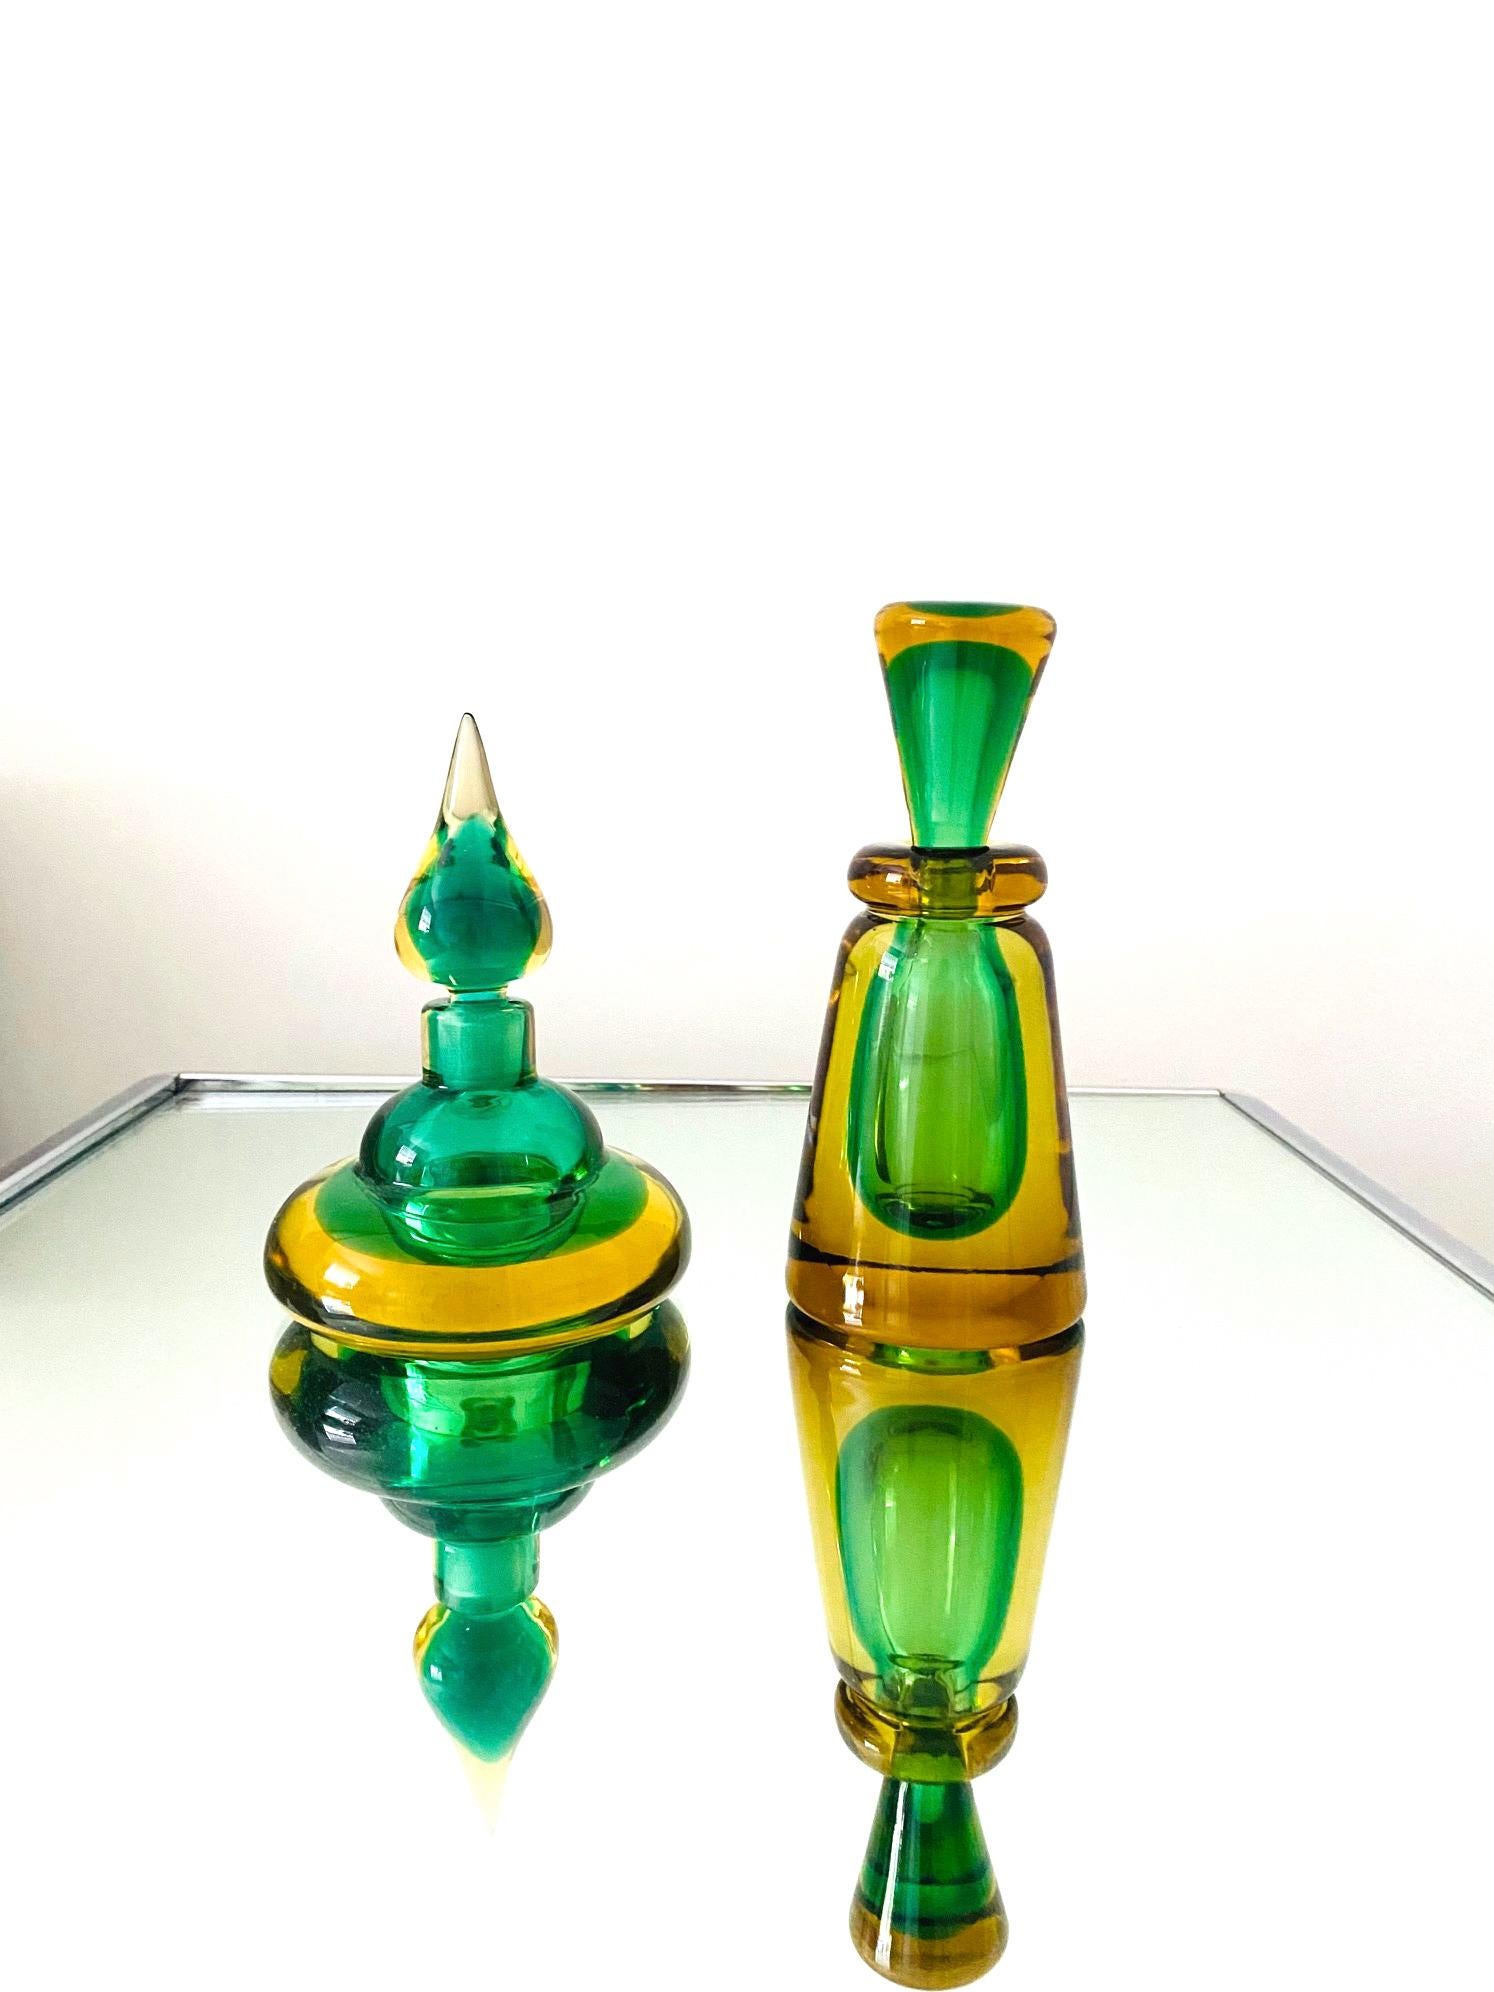 Mid-20th Century Pair of Murano Glass Bottles in Green and Yellow by Flavio Poli, Italy, c. 1960